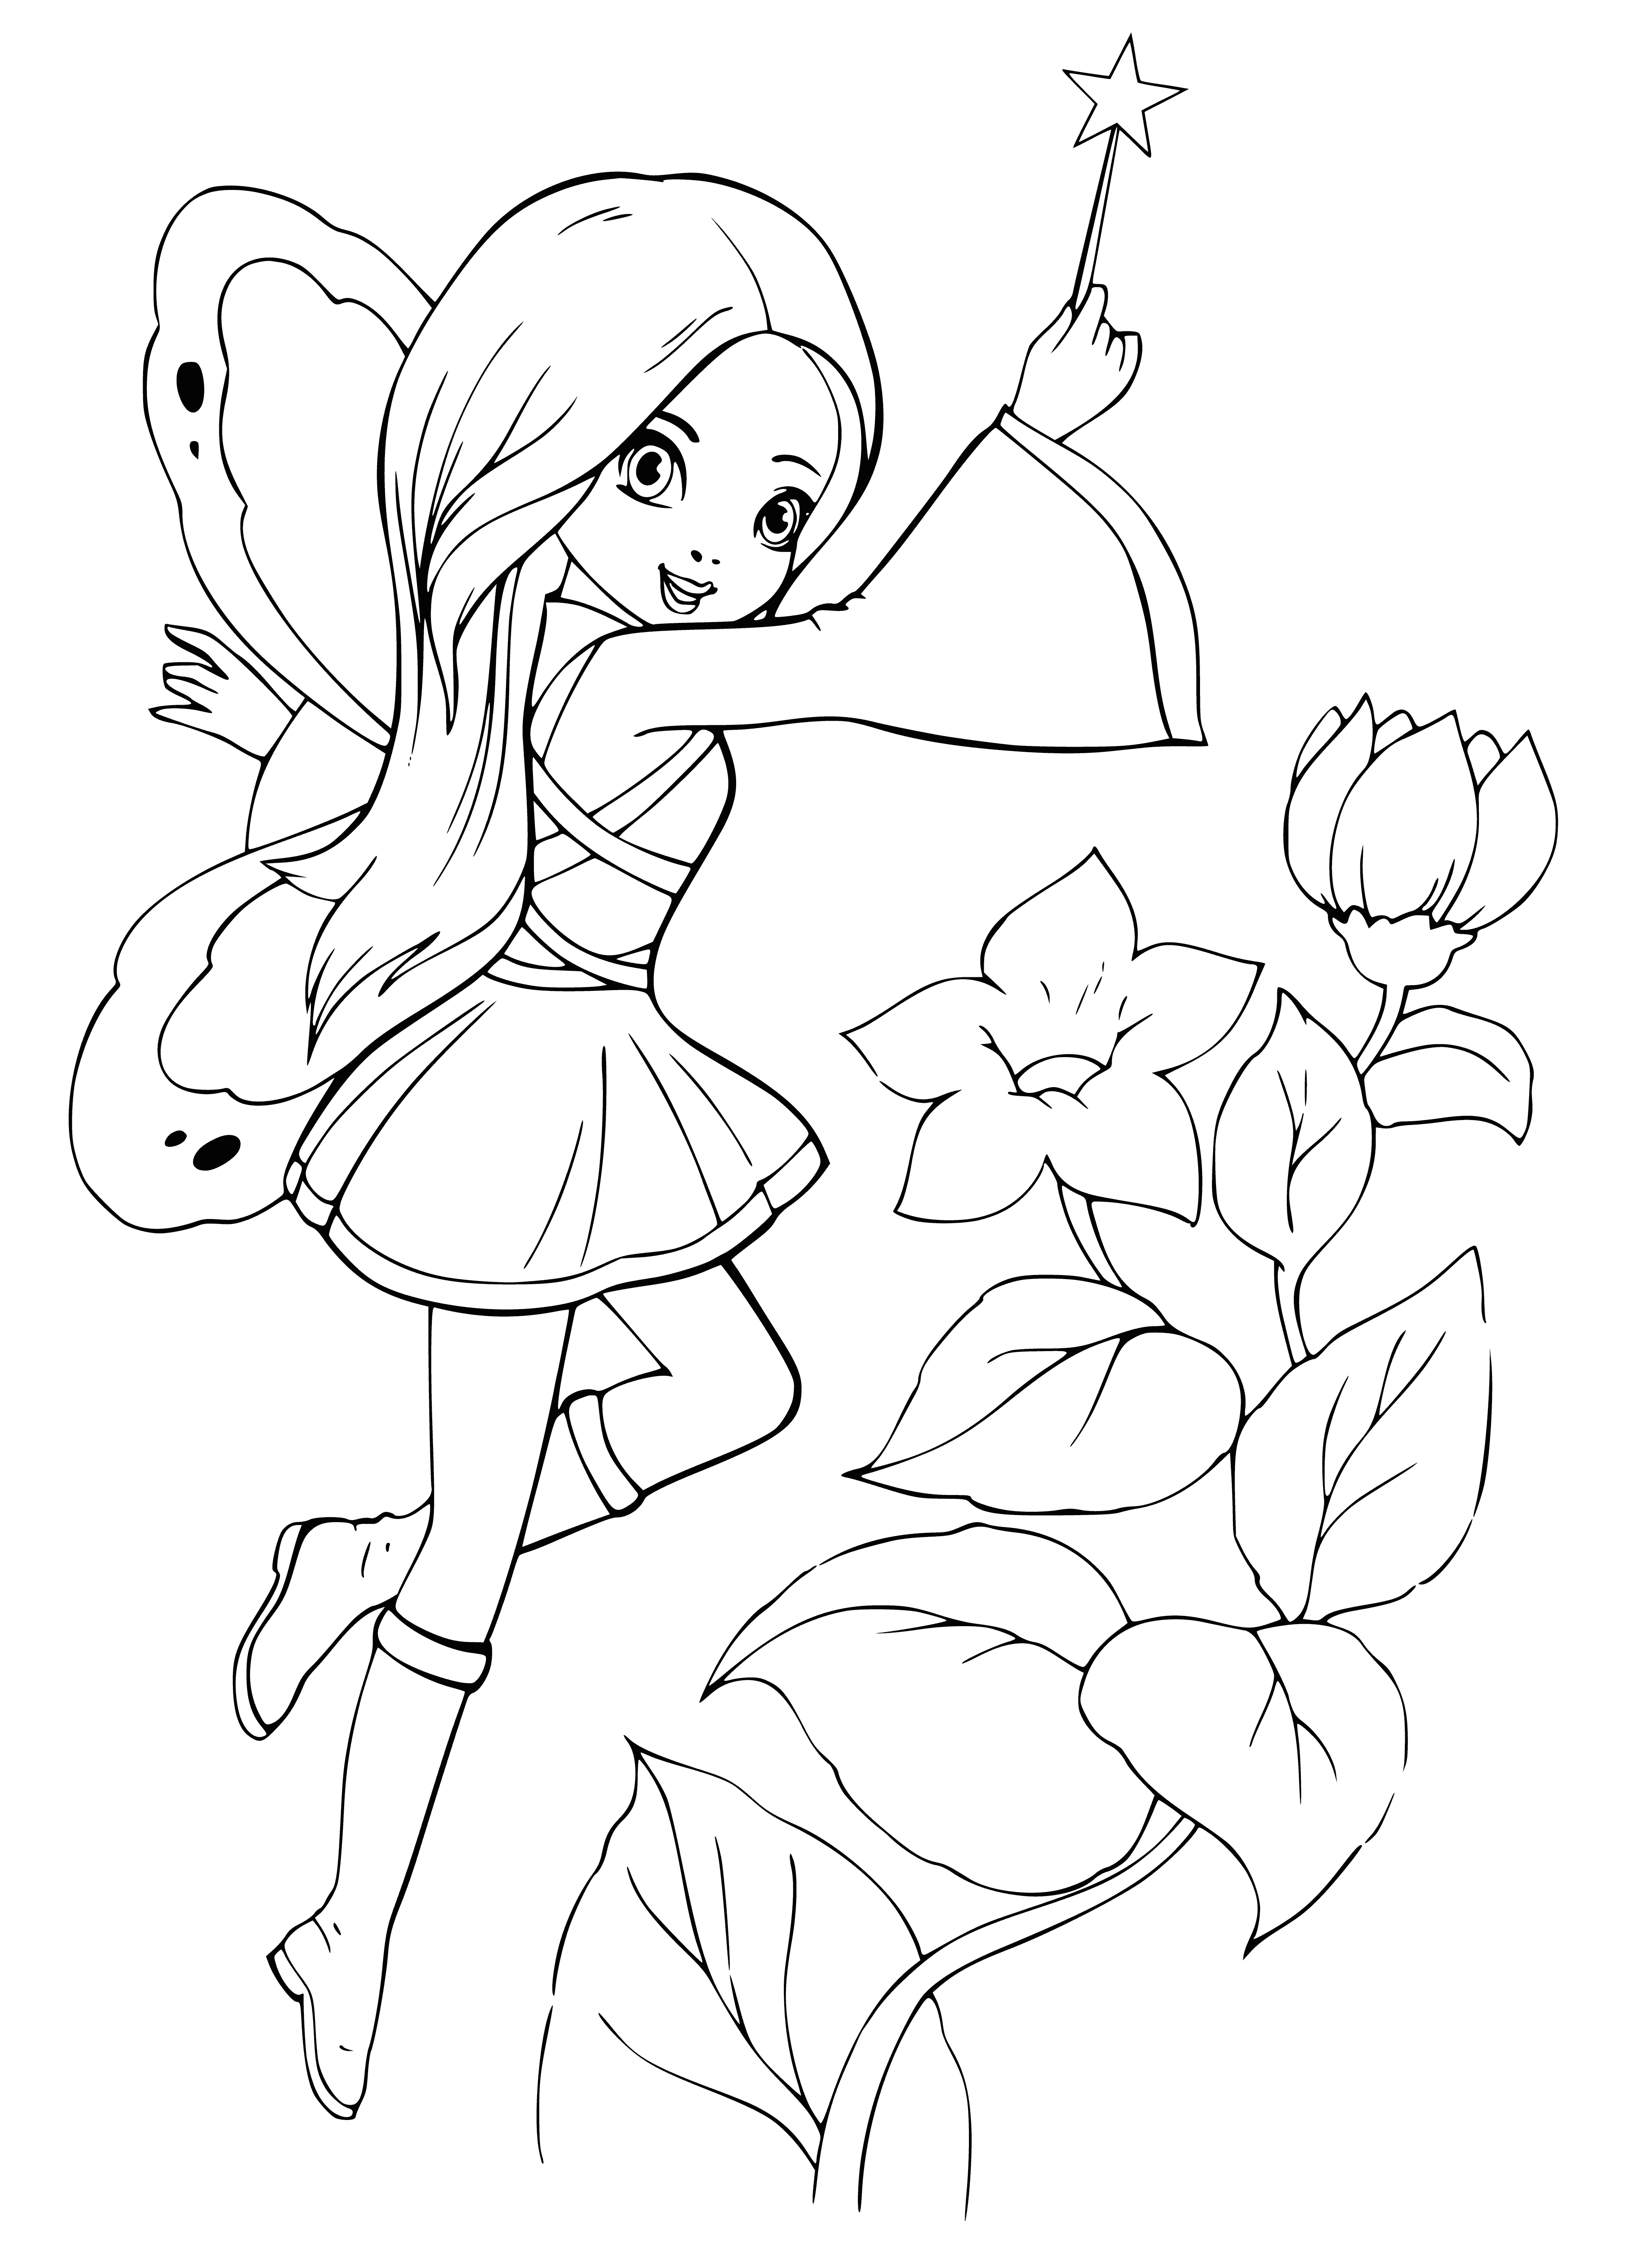 Fairy with a magic wand coloring page